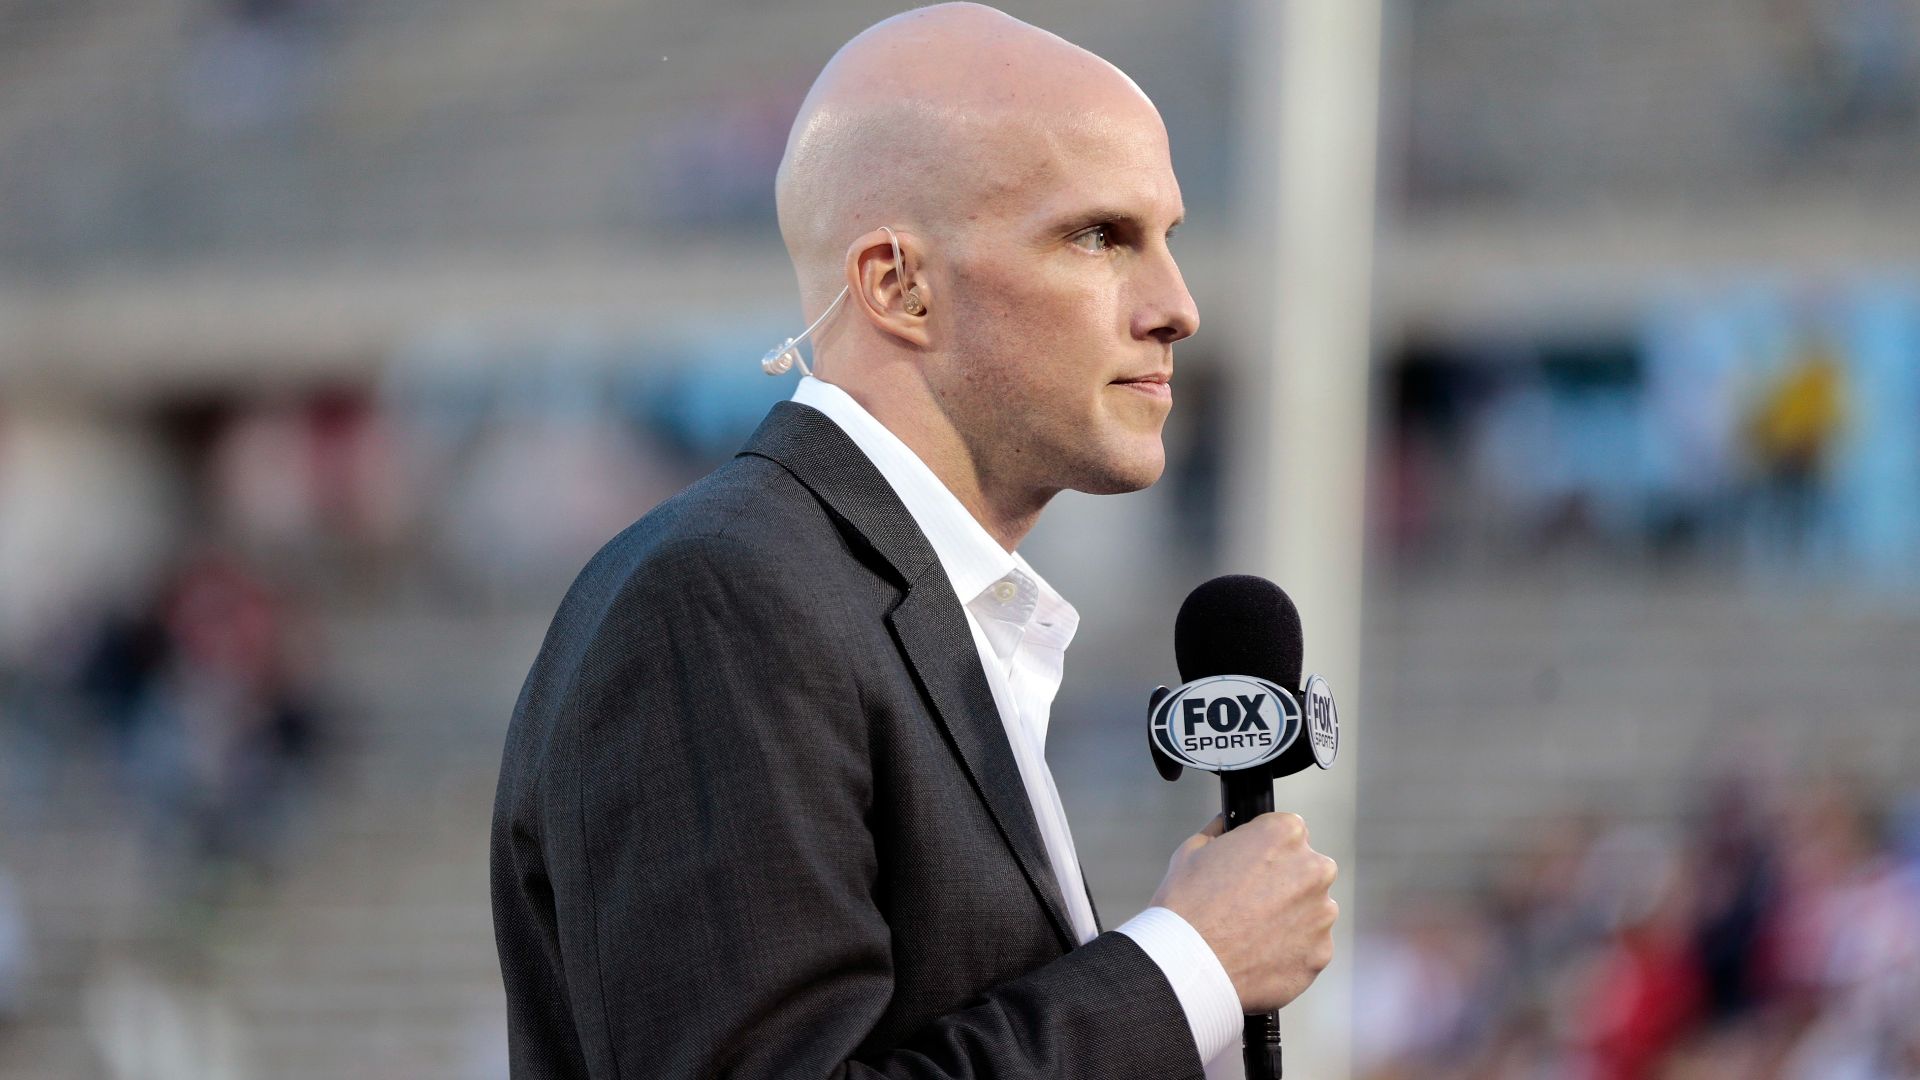 Sports World Mourns Death of Soccer Journalist Grant Wahl